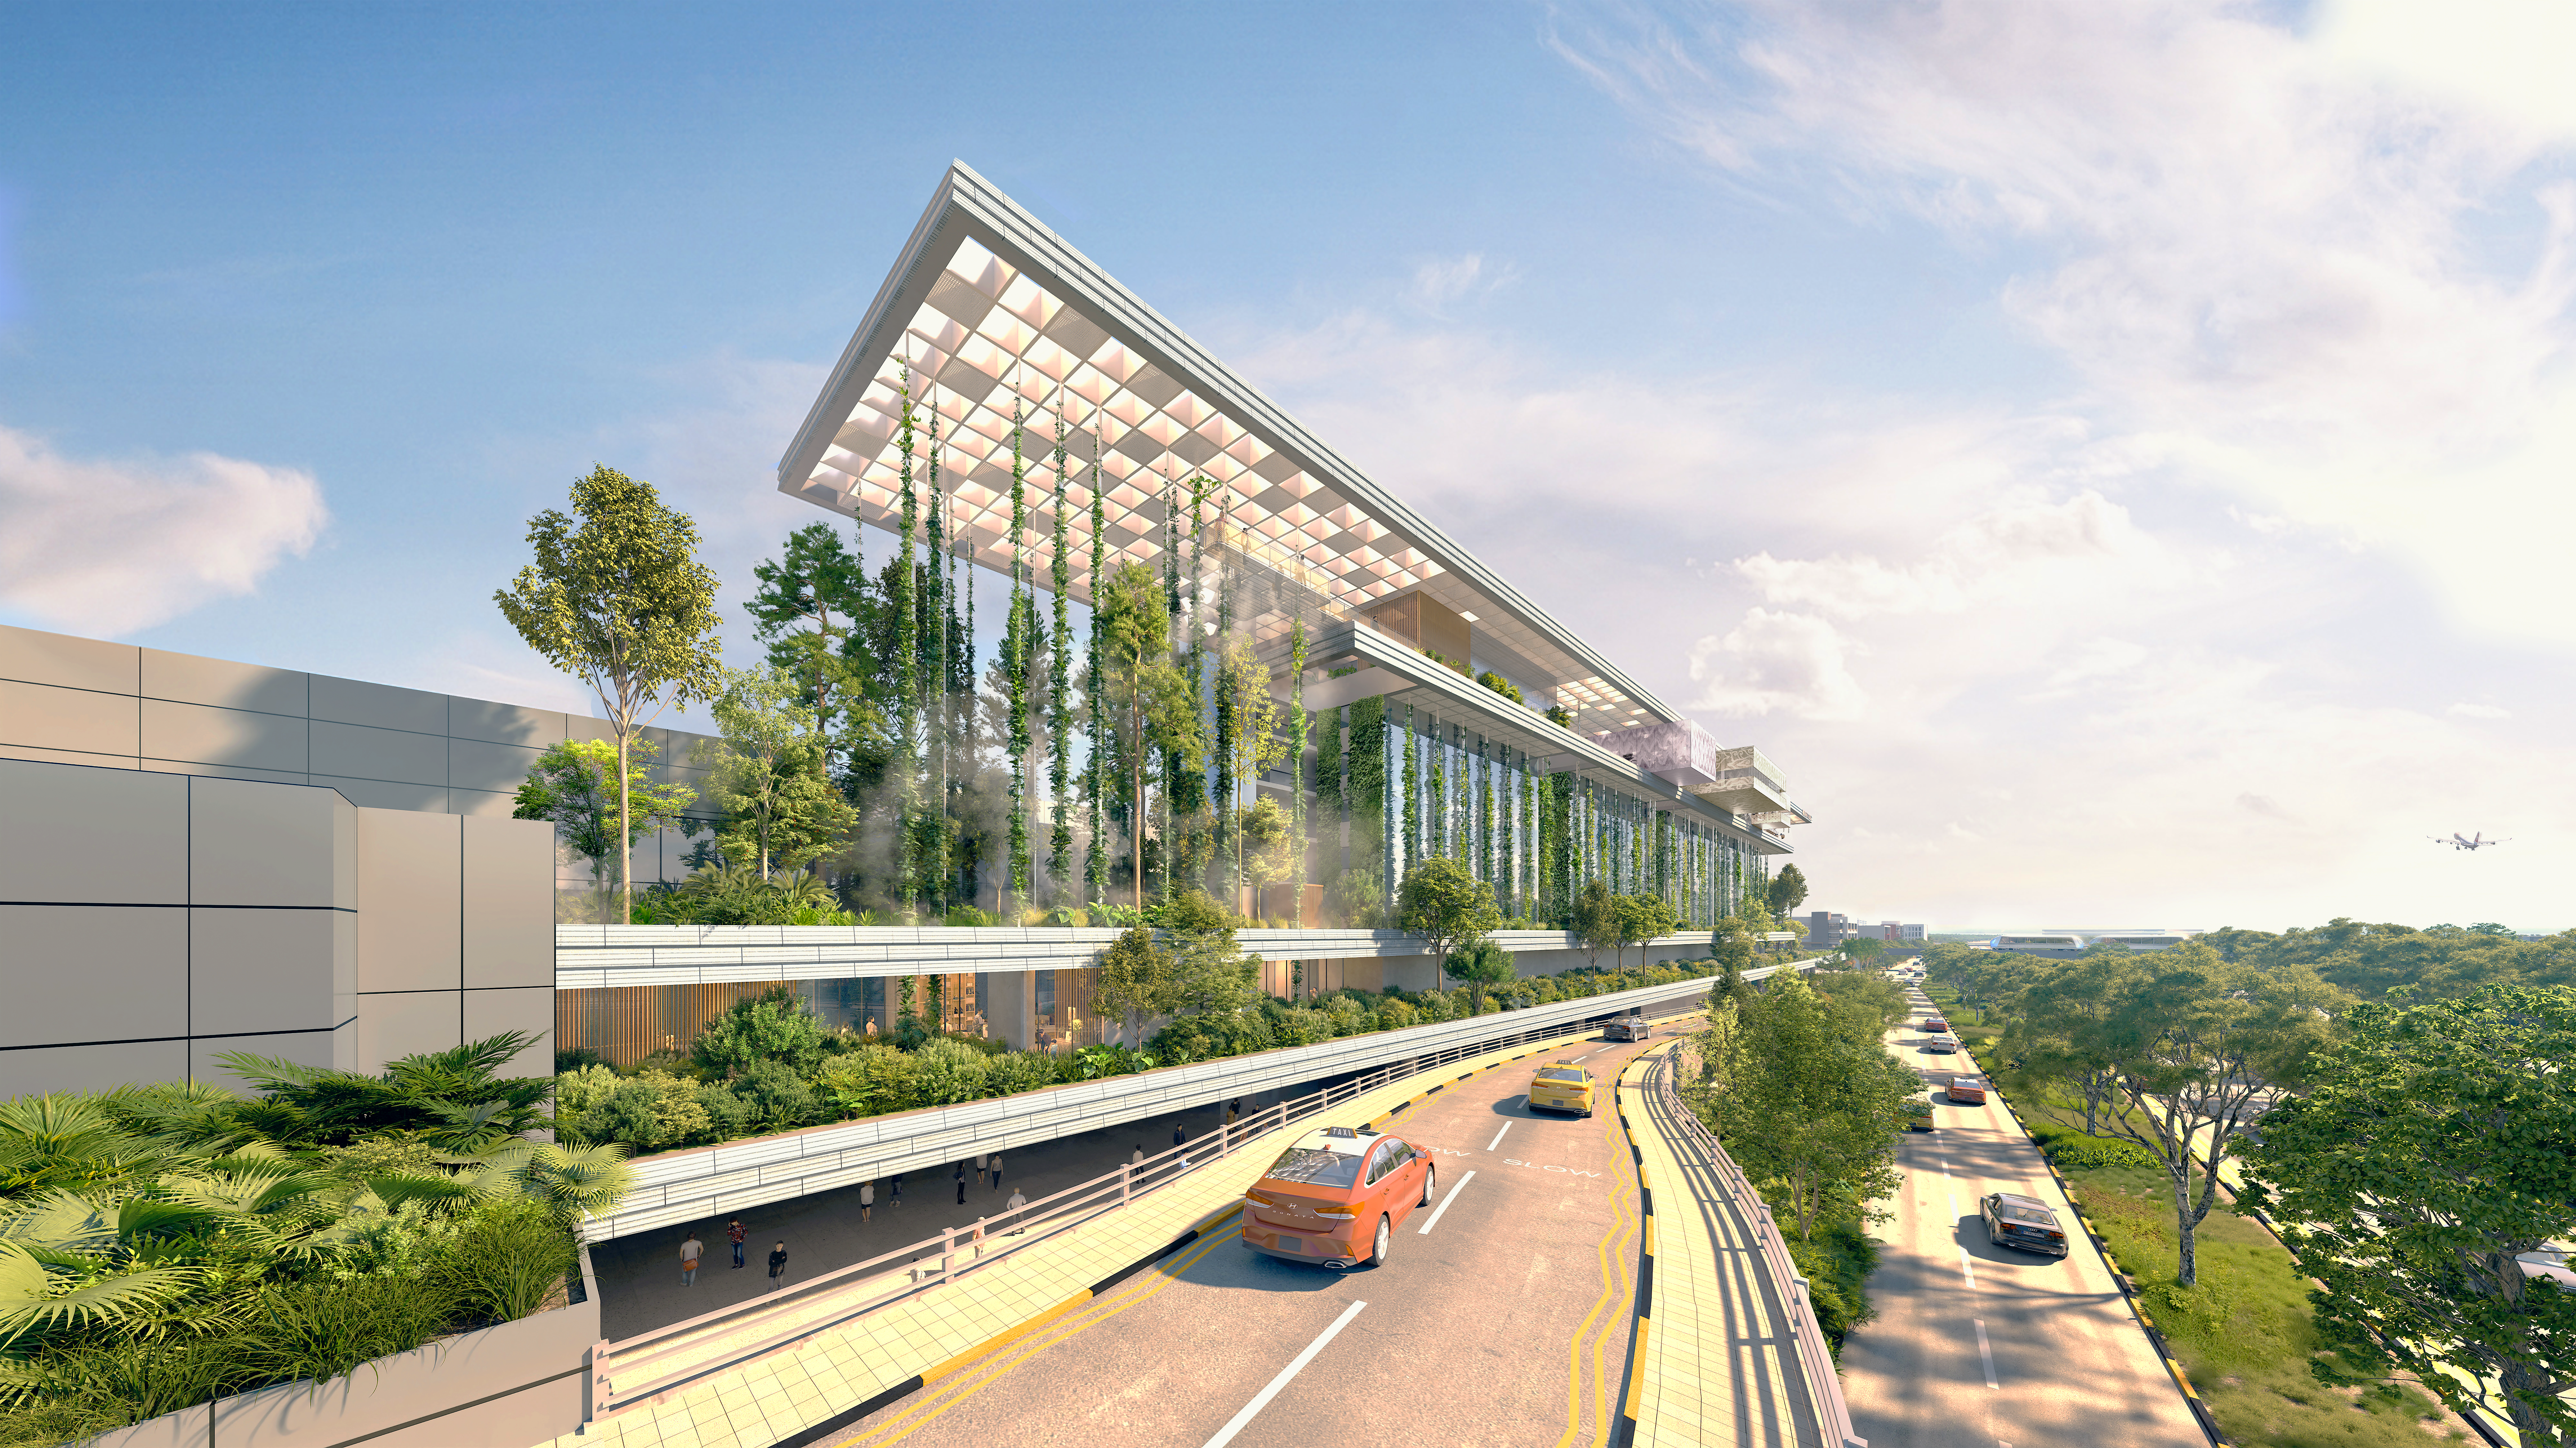 The exterior of the new Terminal 2 hotel at Changi Airport